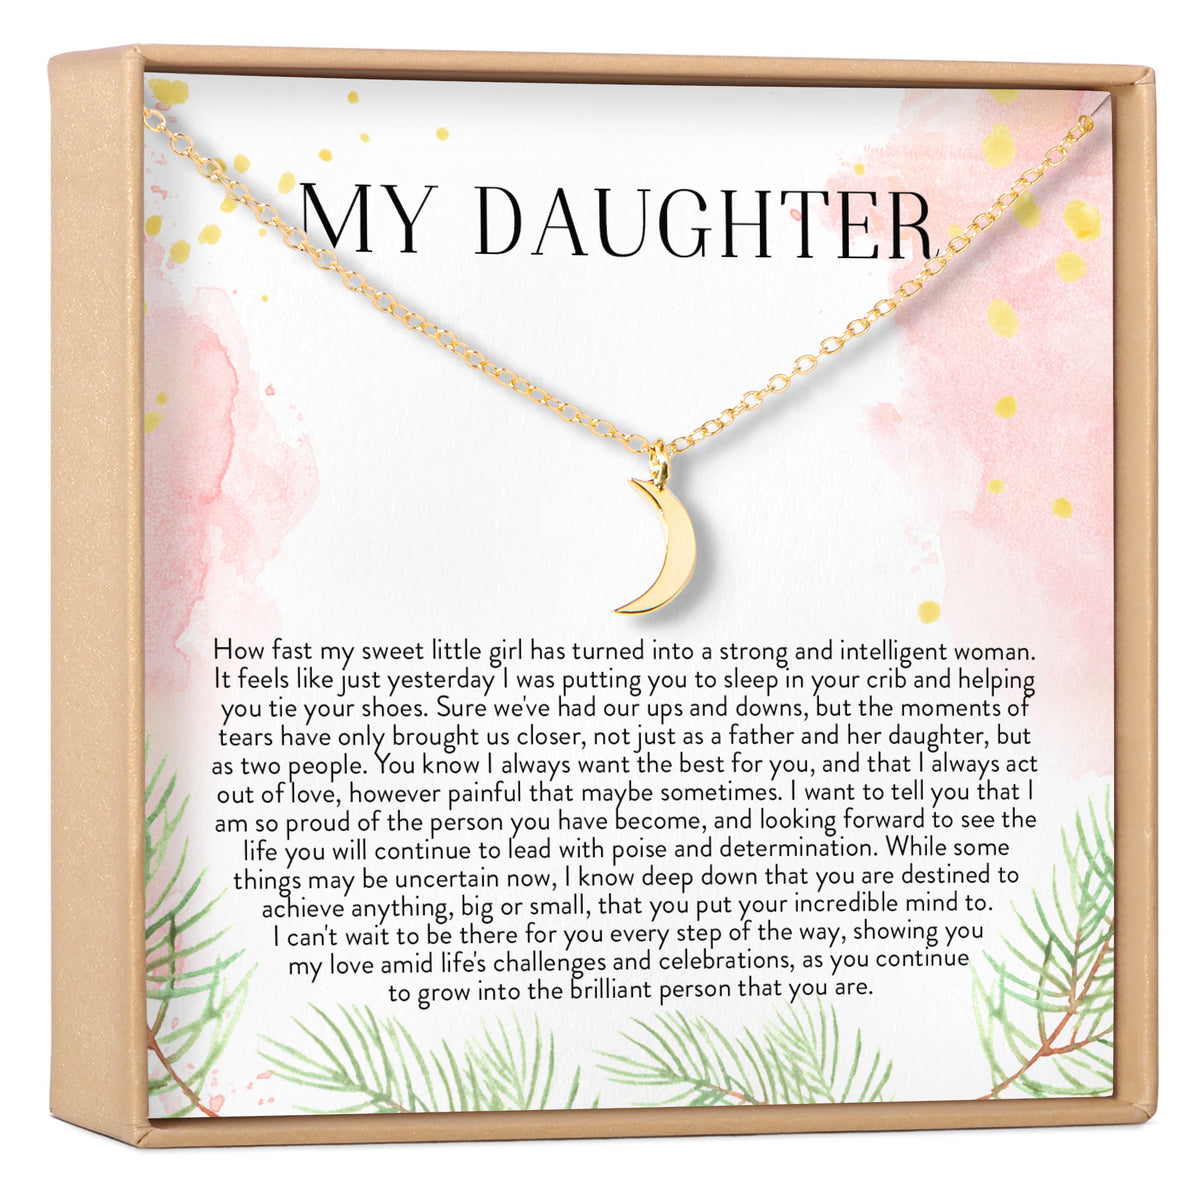 Father &amp; Daughter Necklace, Multiple Styles Necklace